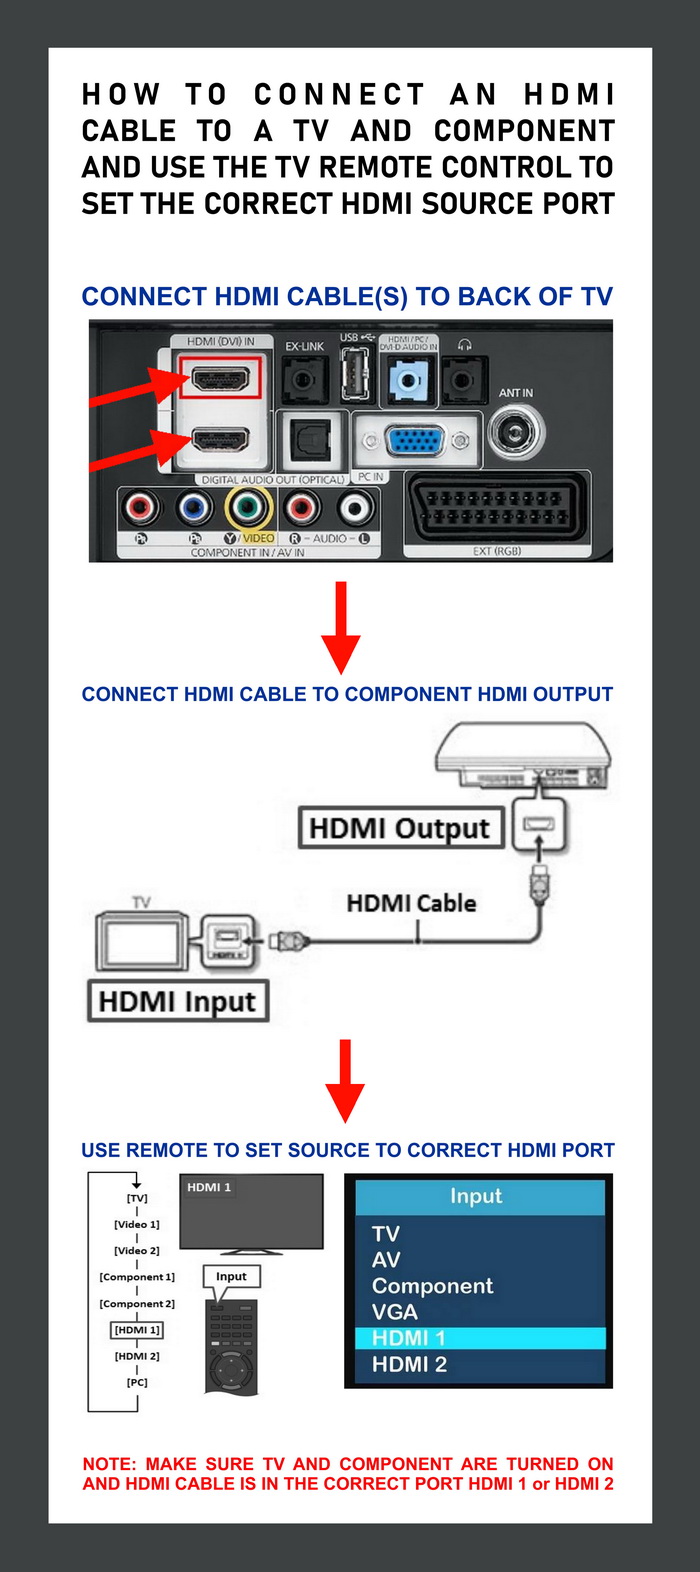 How to connect HDMI cable to TV